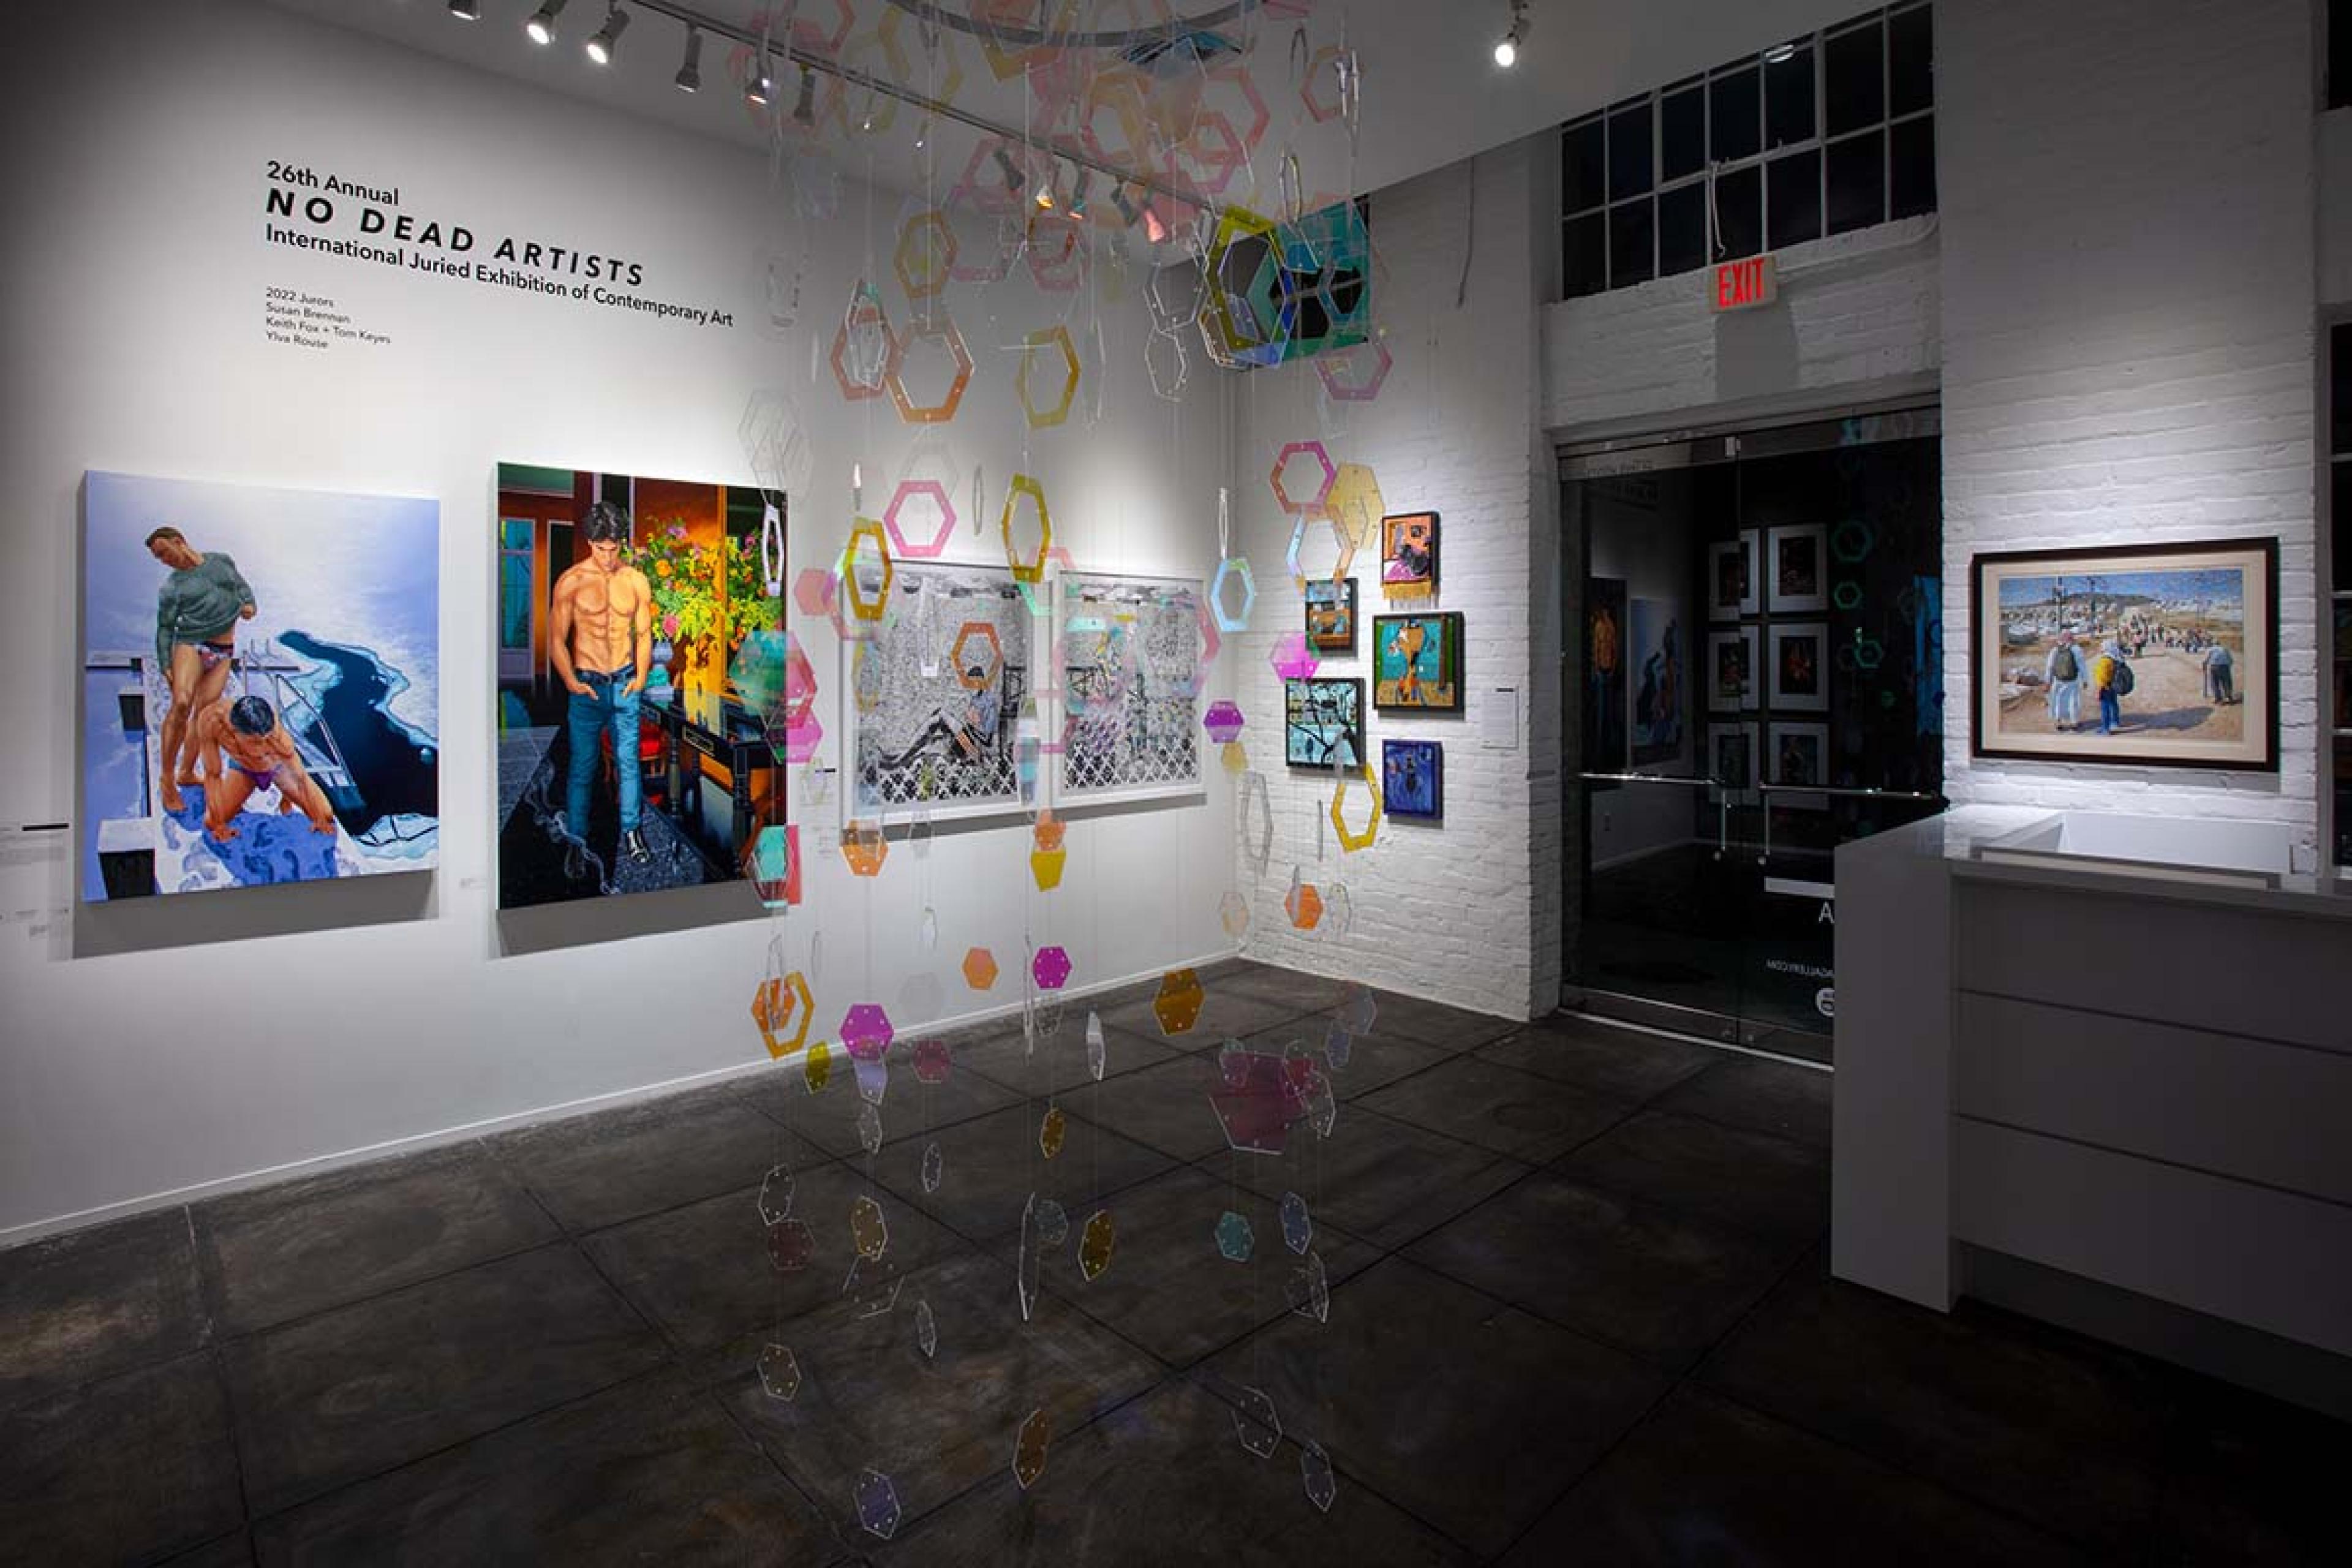 gallery space with colorful circles hanging from the ceiling